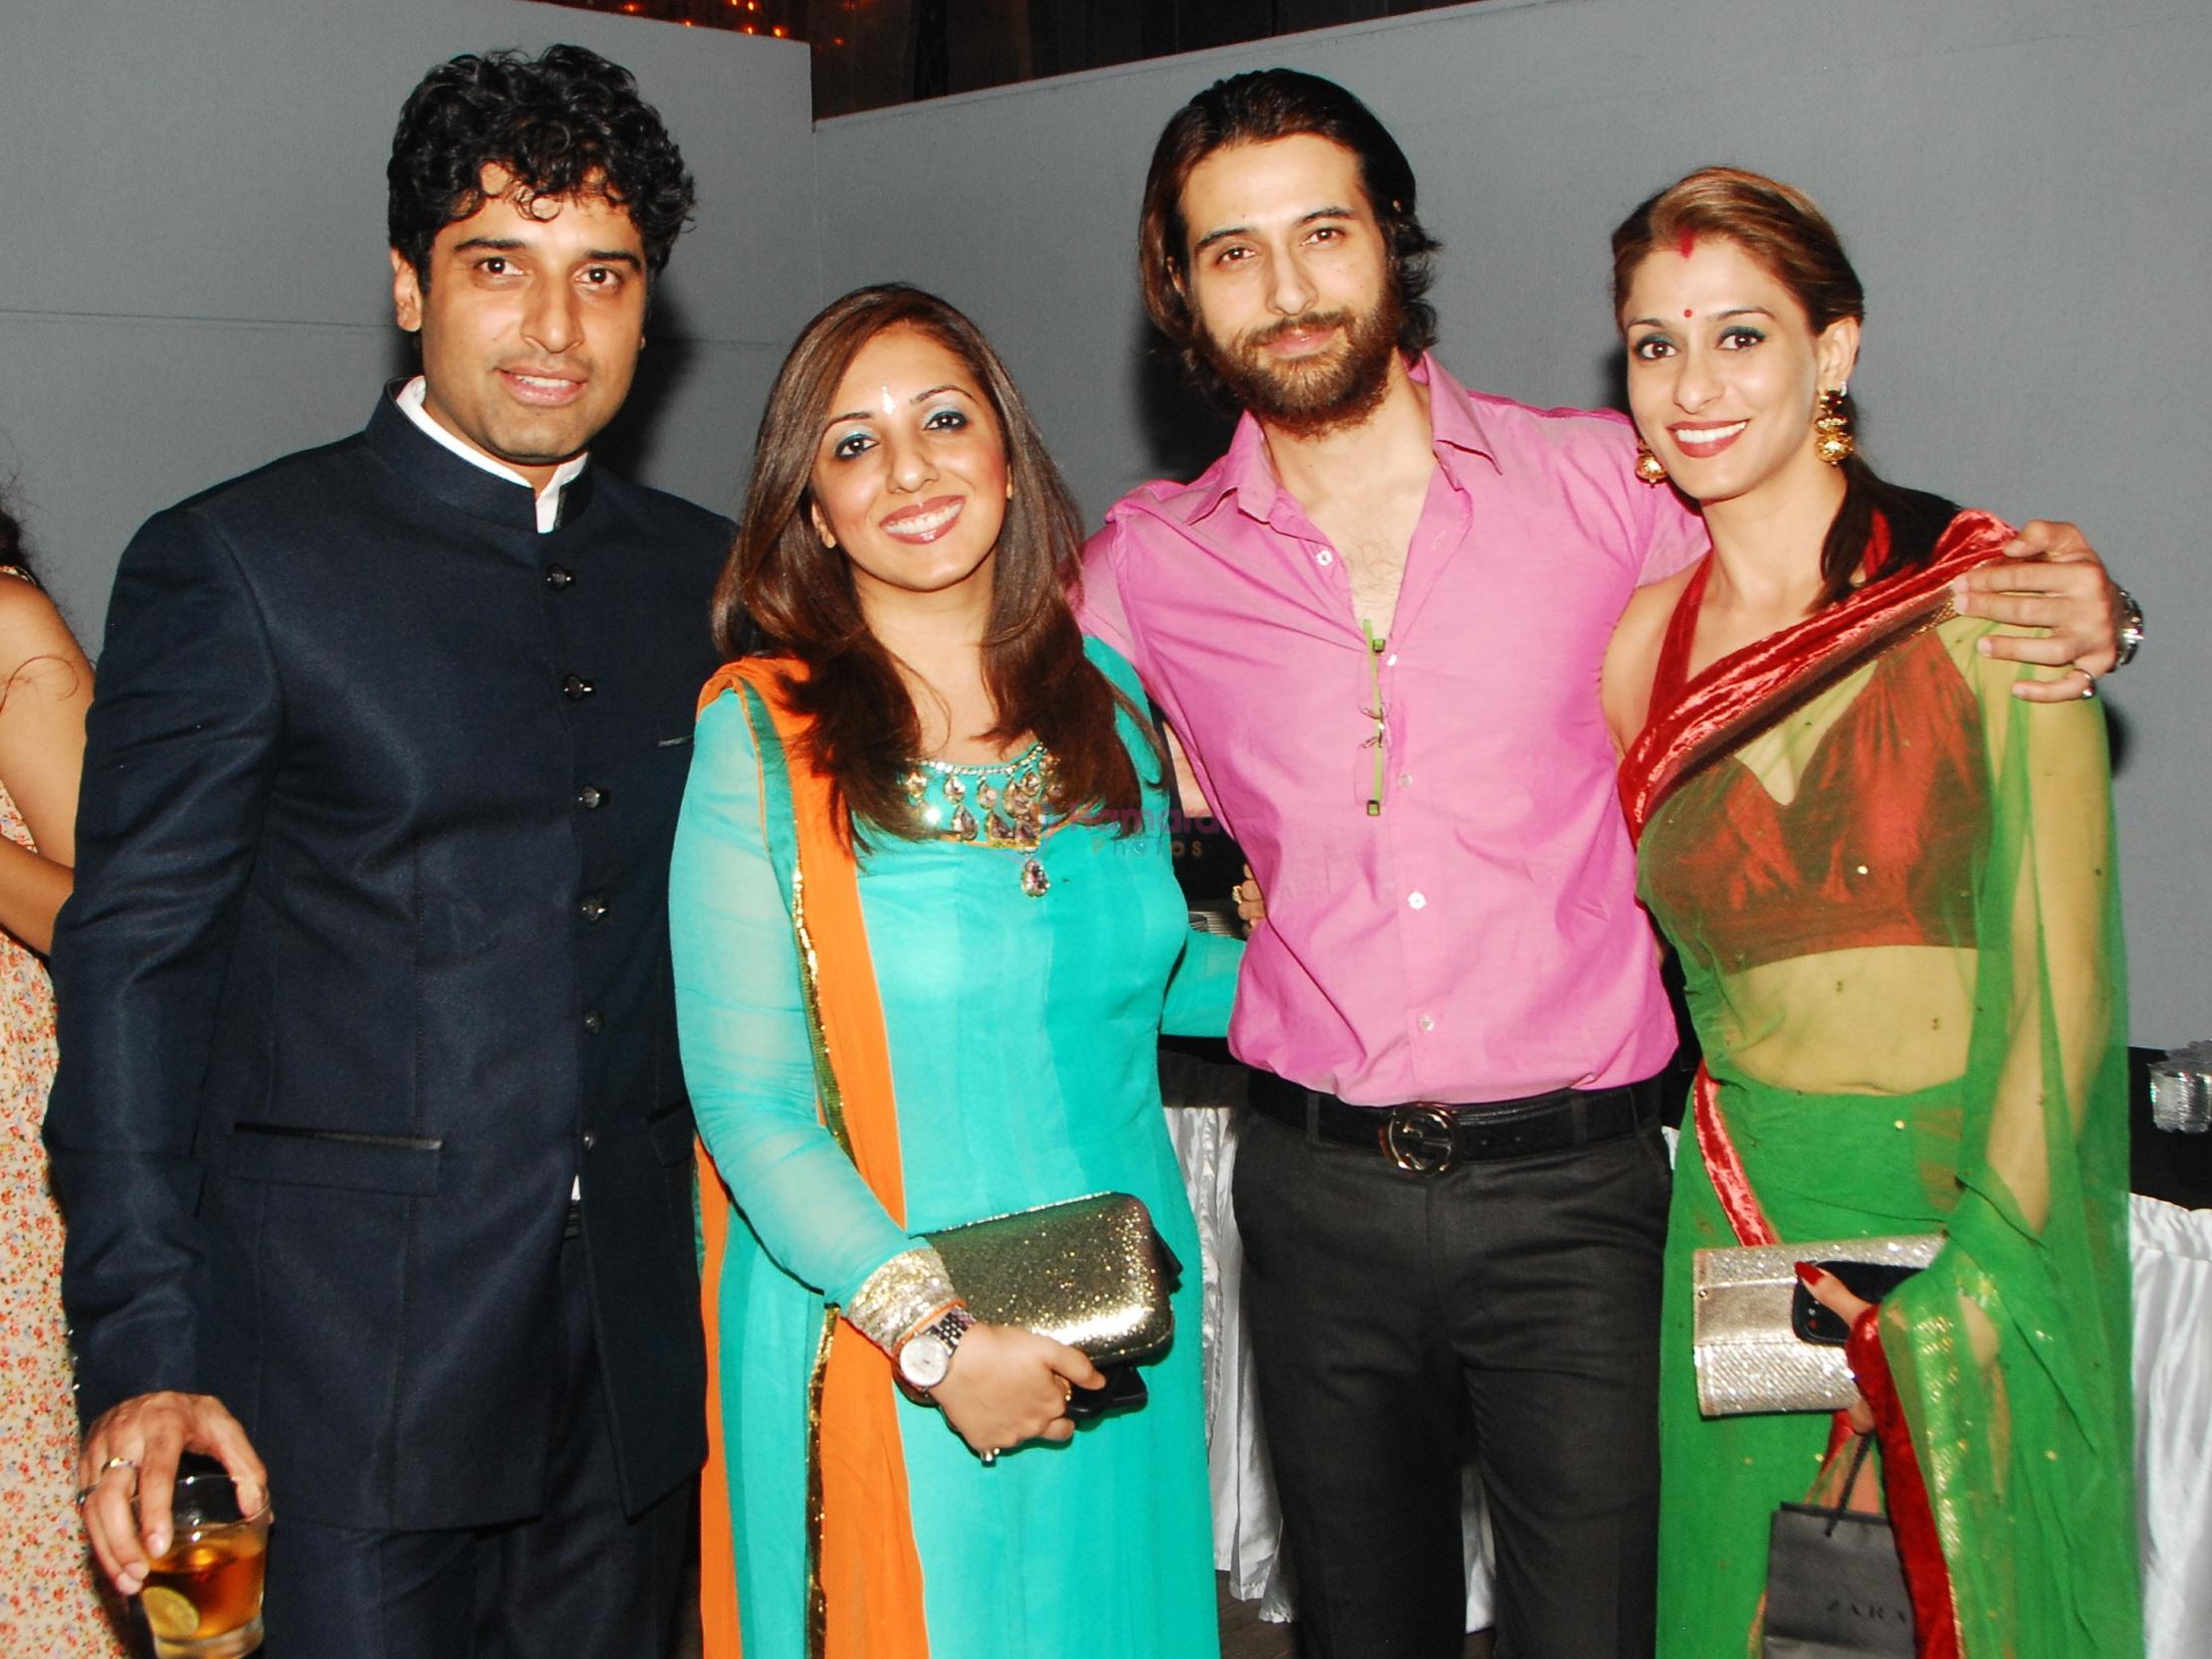 Shakti, Sai, Apoorva Agnihotri awith wife at the launch of Sai Deodhar and Shakti Anand's Production house Thoughtrain Entertainment in Mumbai on 18th Nov 2012